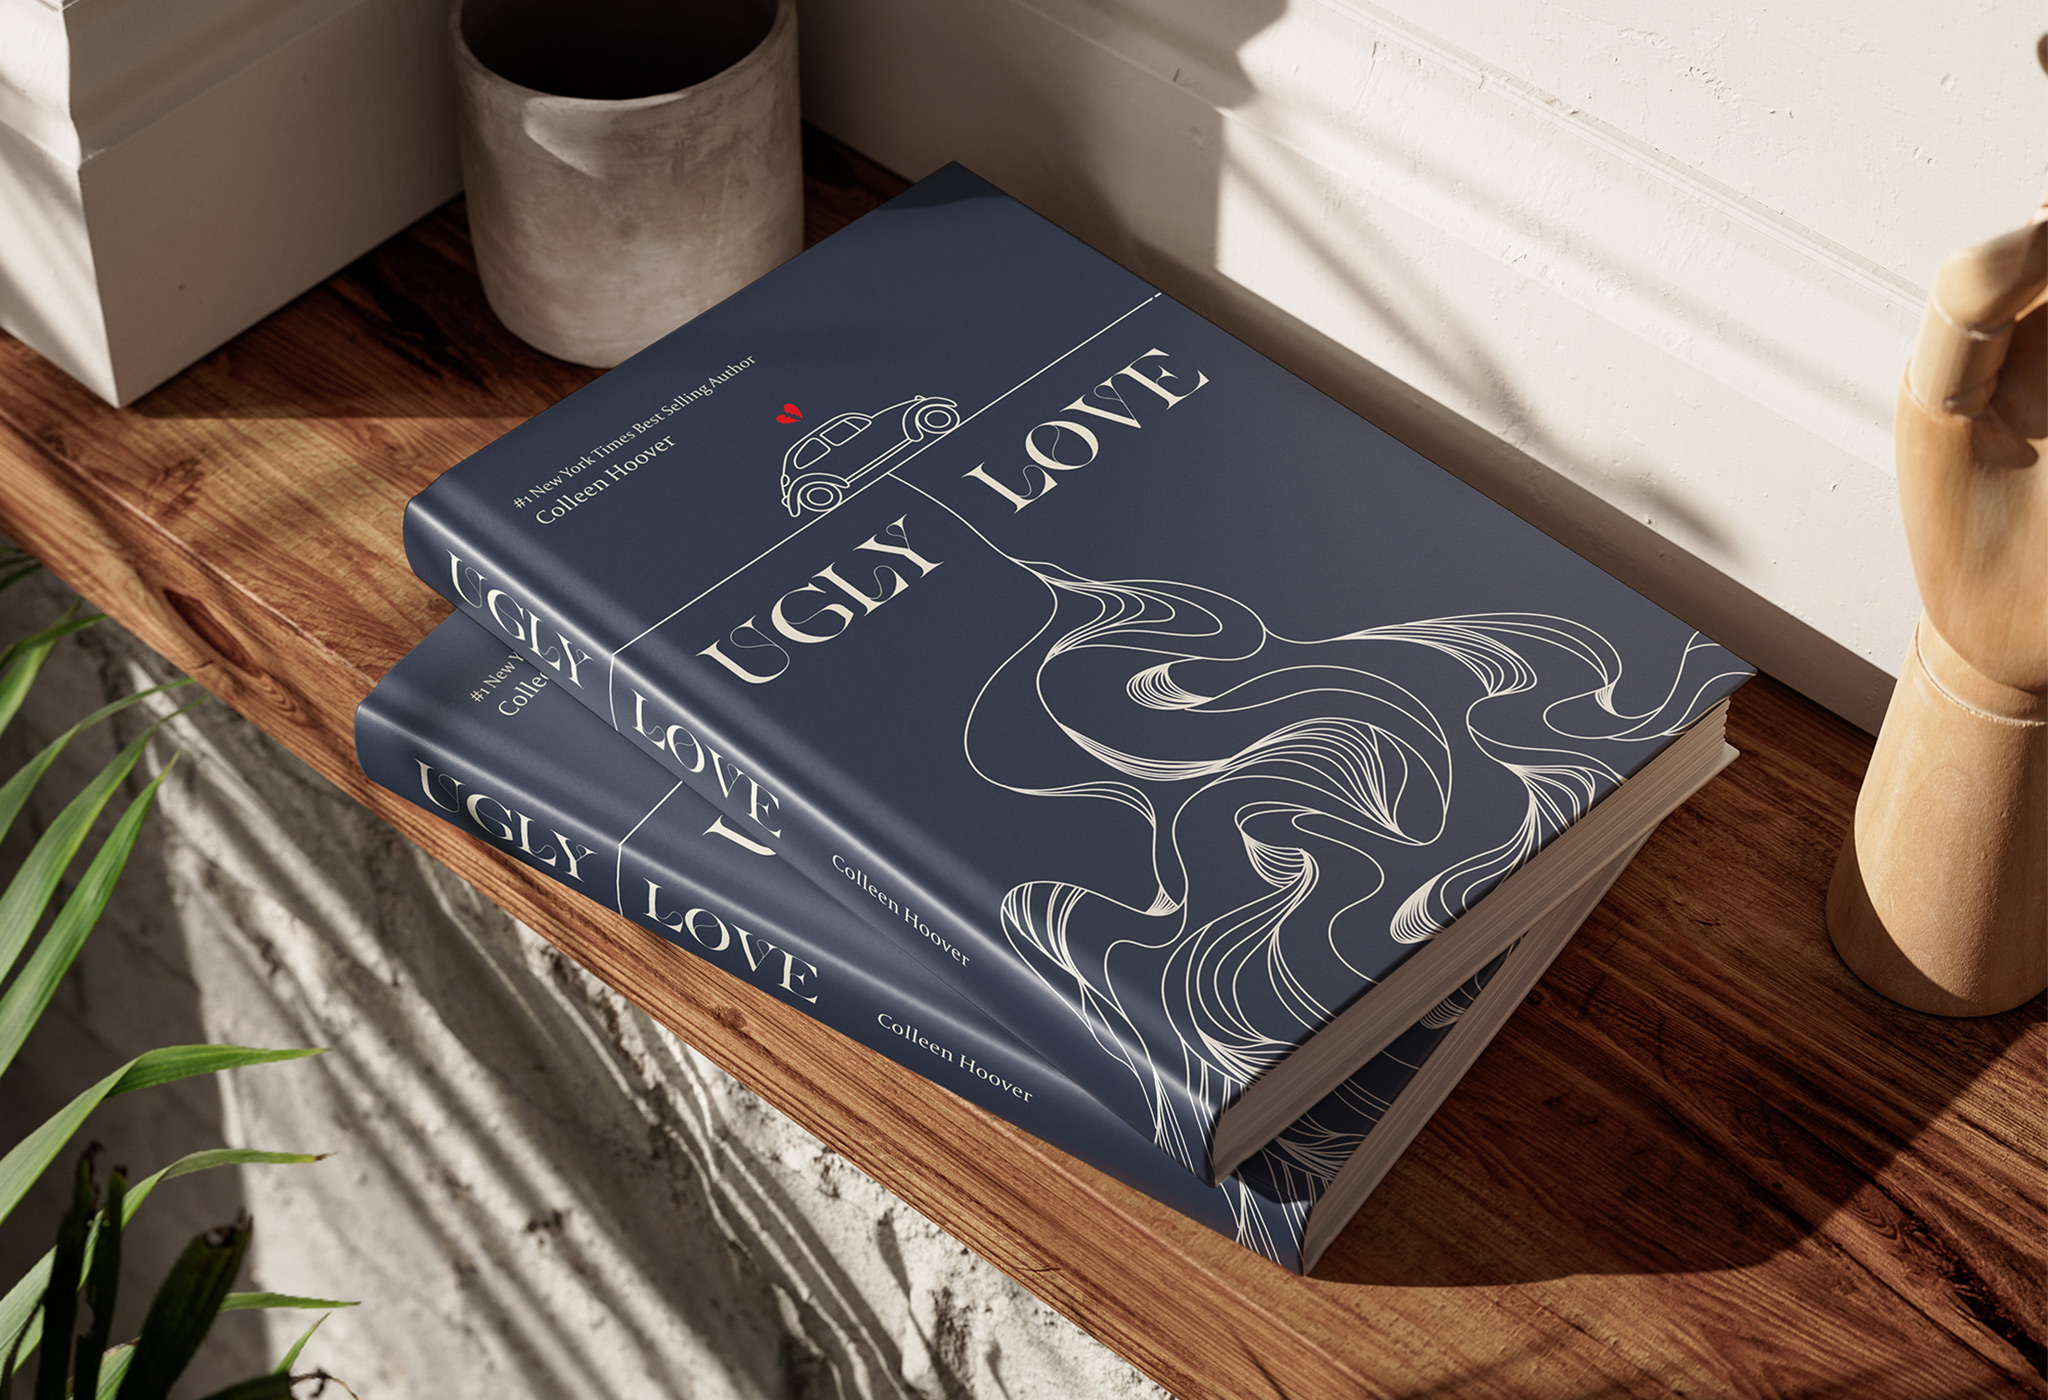 Ugly Love cover print mockup, providing a clear view of the fine illustrations and typographic choices.